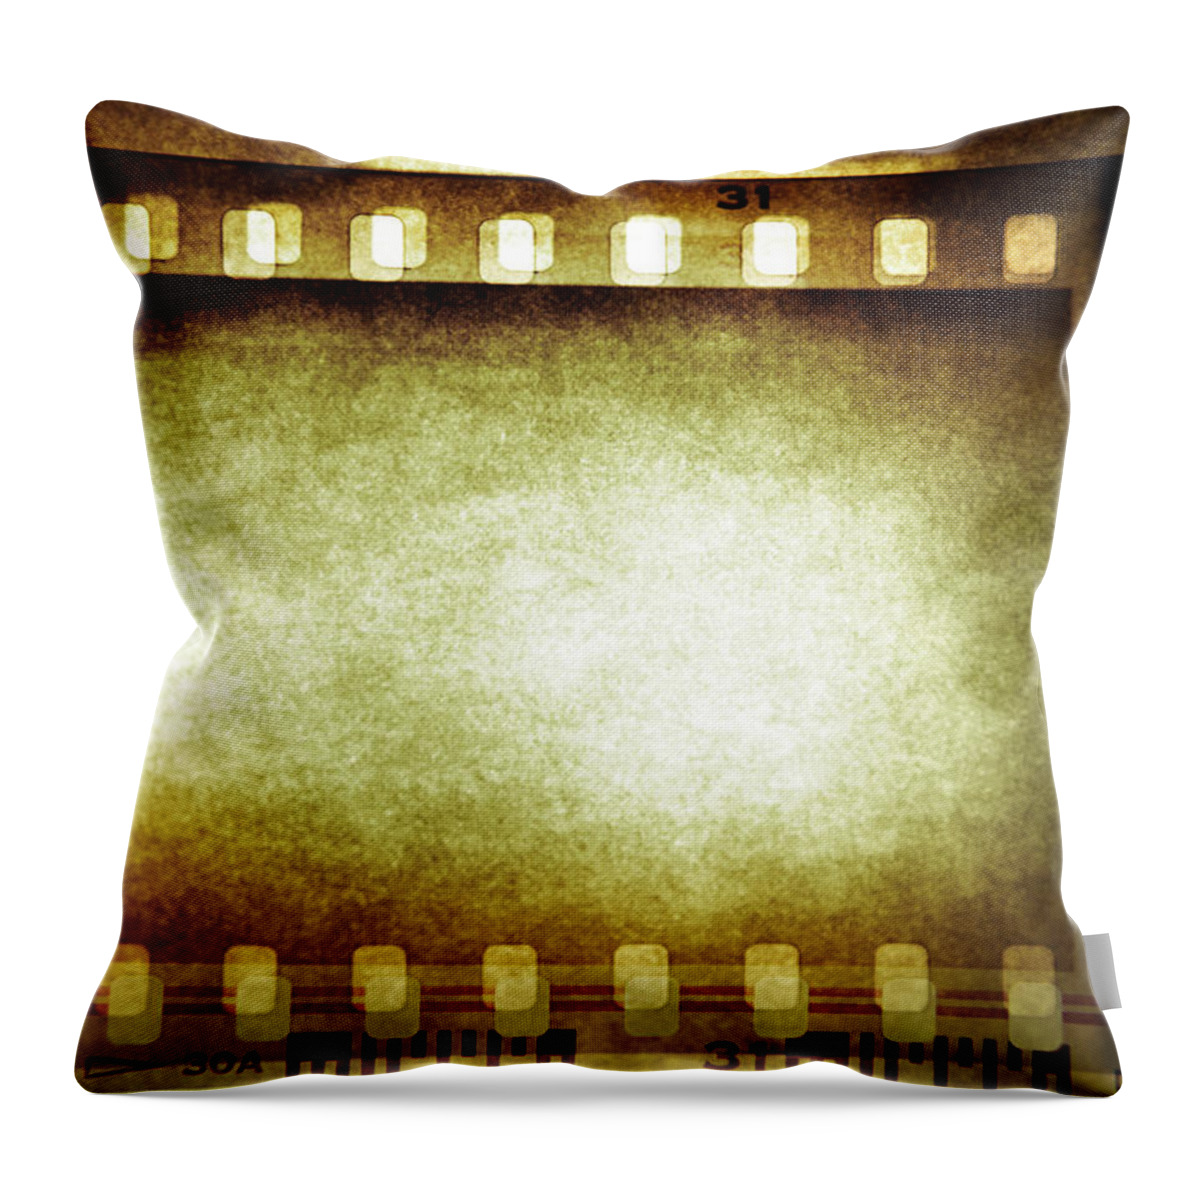 Film Throw Pillow featuring the photograph Filmstrip by Les Cunliffe